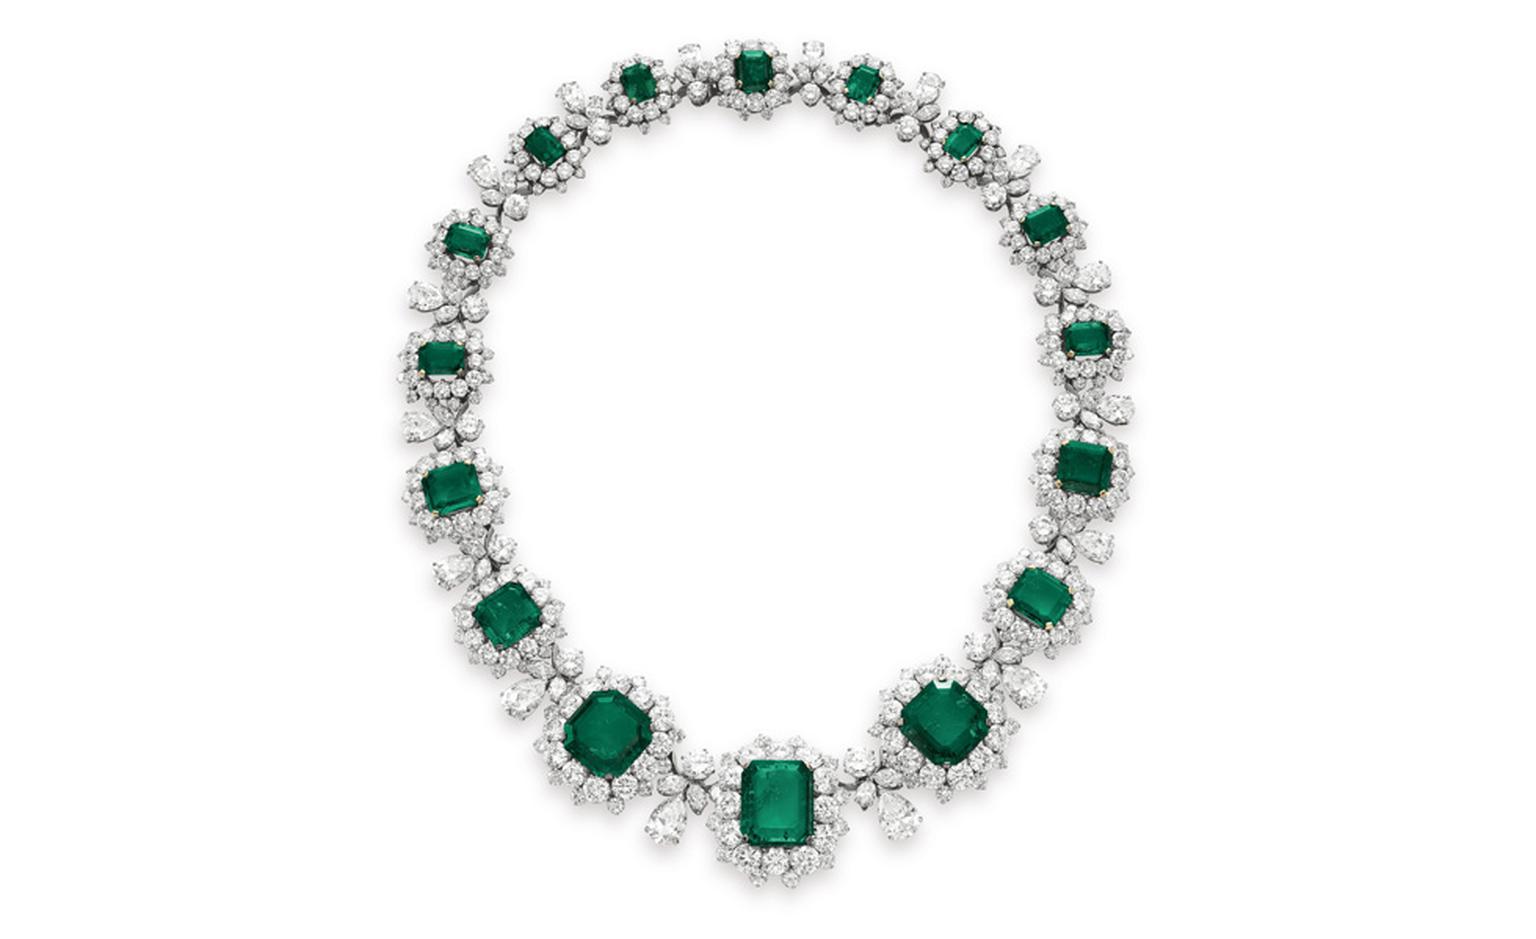 The BVLGARI Emerald Necklace, estimate: $1,000,000 – 1,500,000. The necklace can be worn with an emerald pendant.